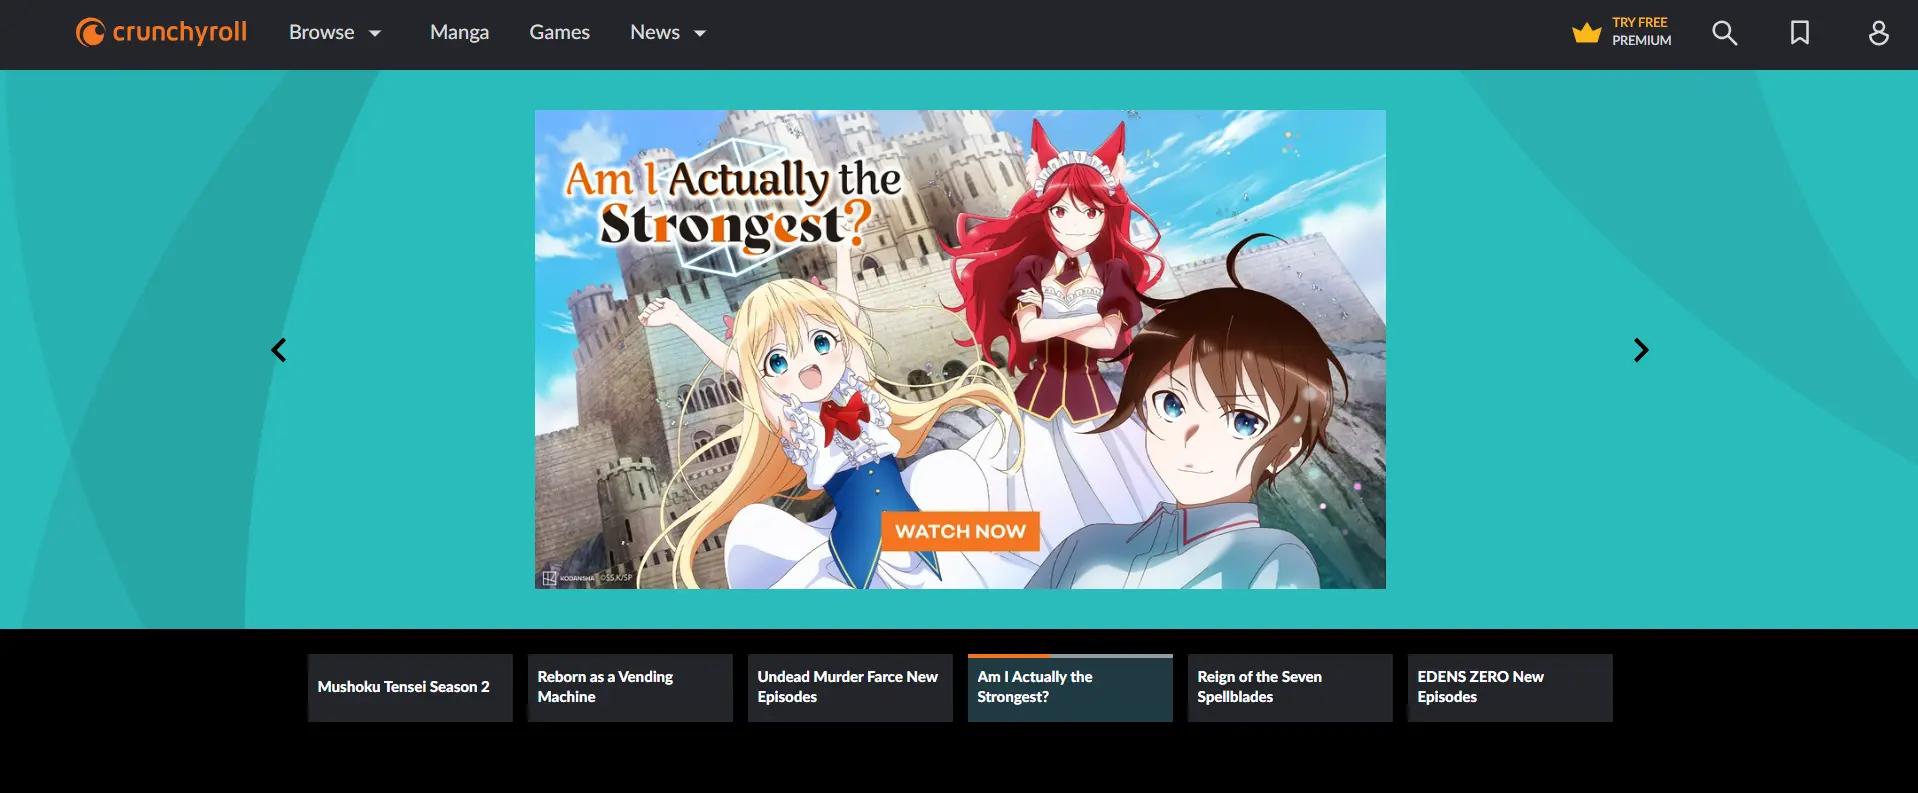 Crunchyroll's official website utilizes the link www.crunchyroll/activate, enabling users to either log in or create an account, select their desired plan, and subsequently activate the channel.